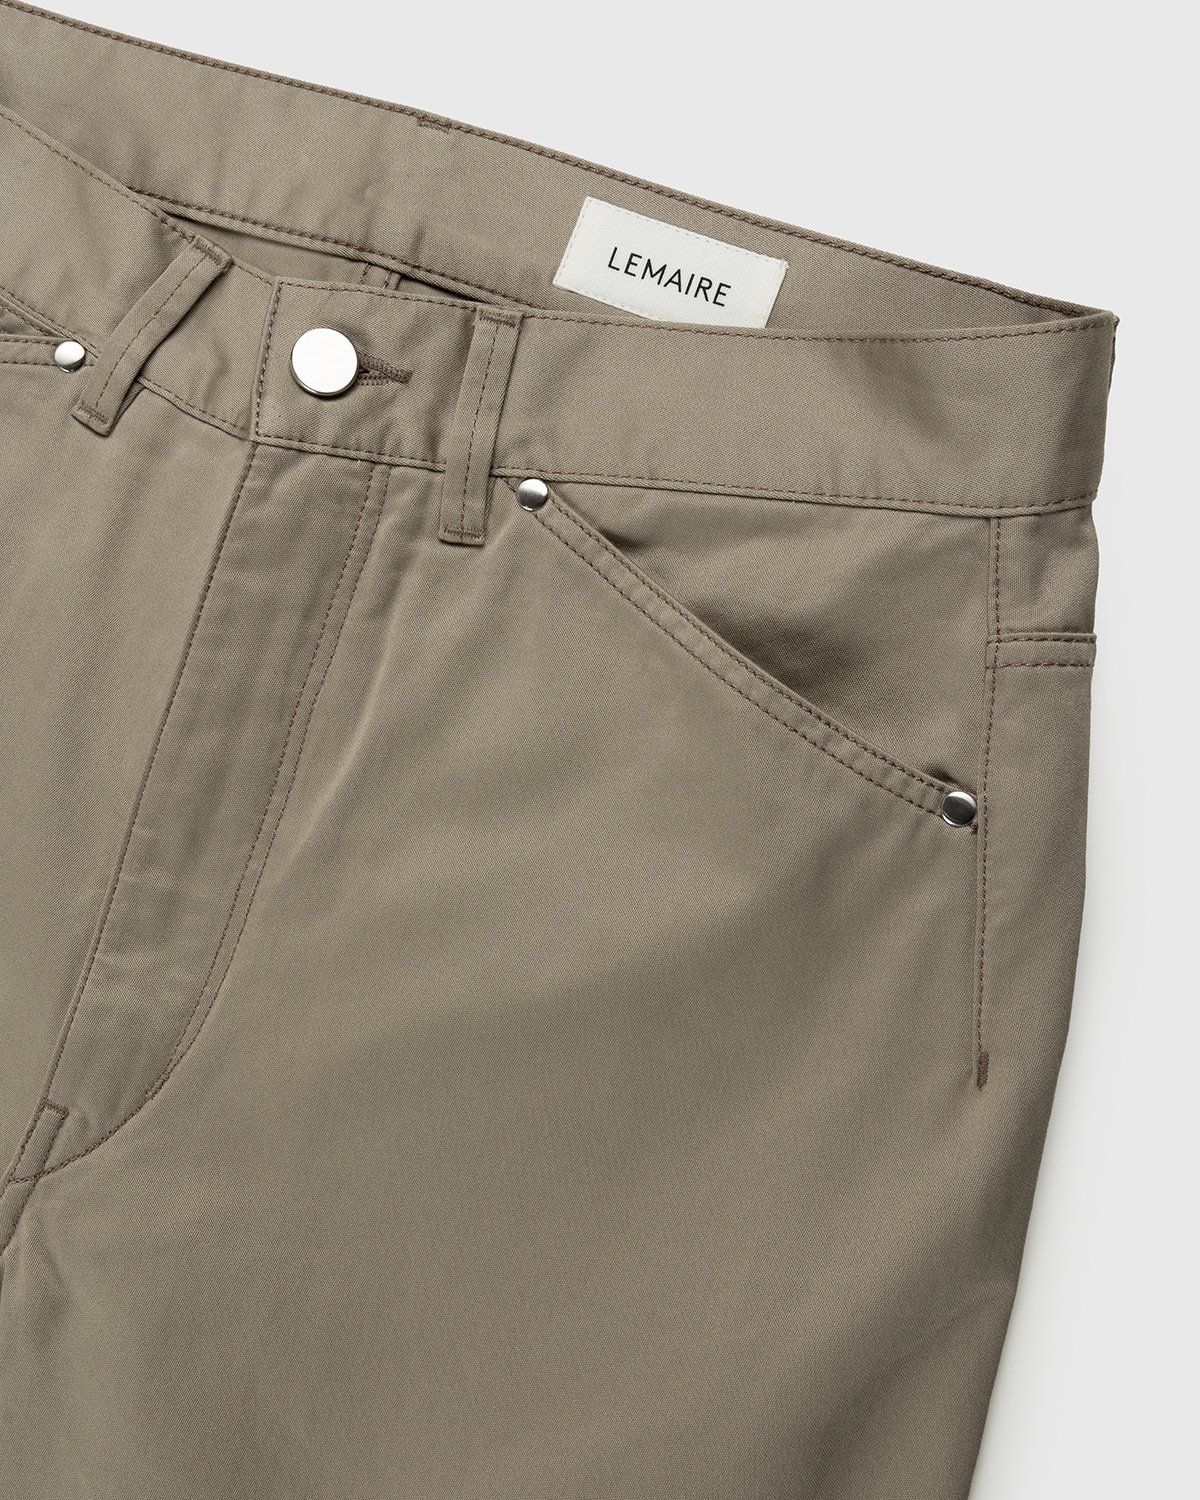 Lemaire – Seamless Pants Light Taupe - Image 4